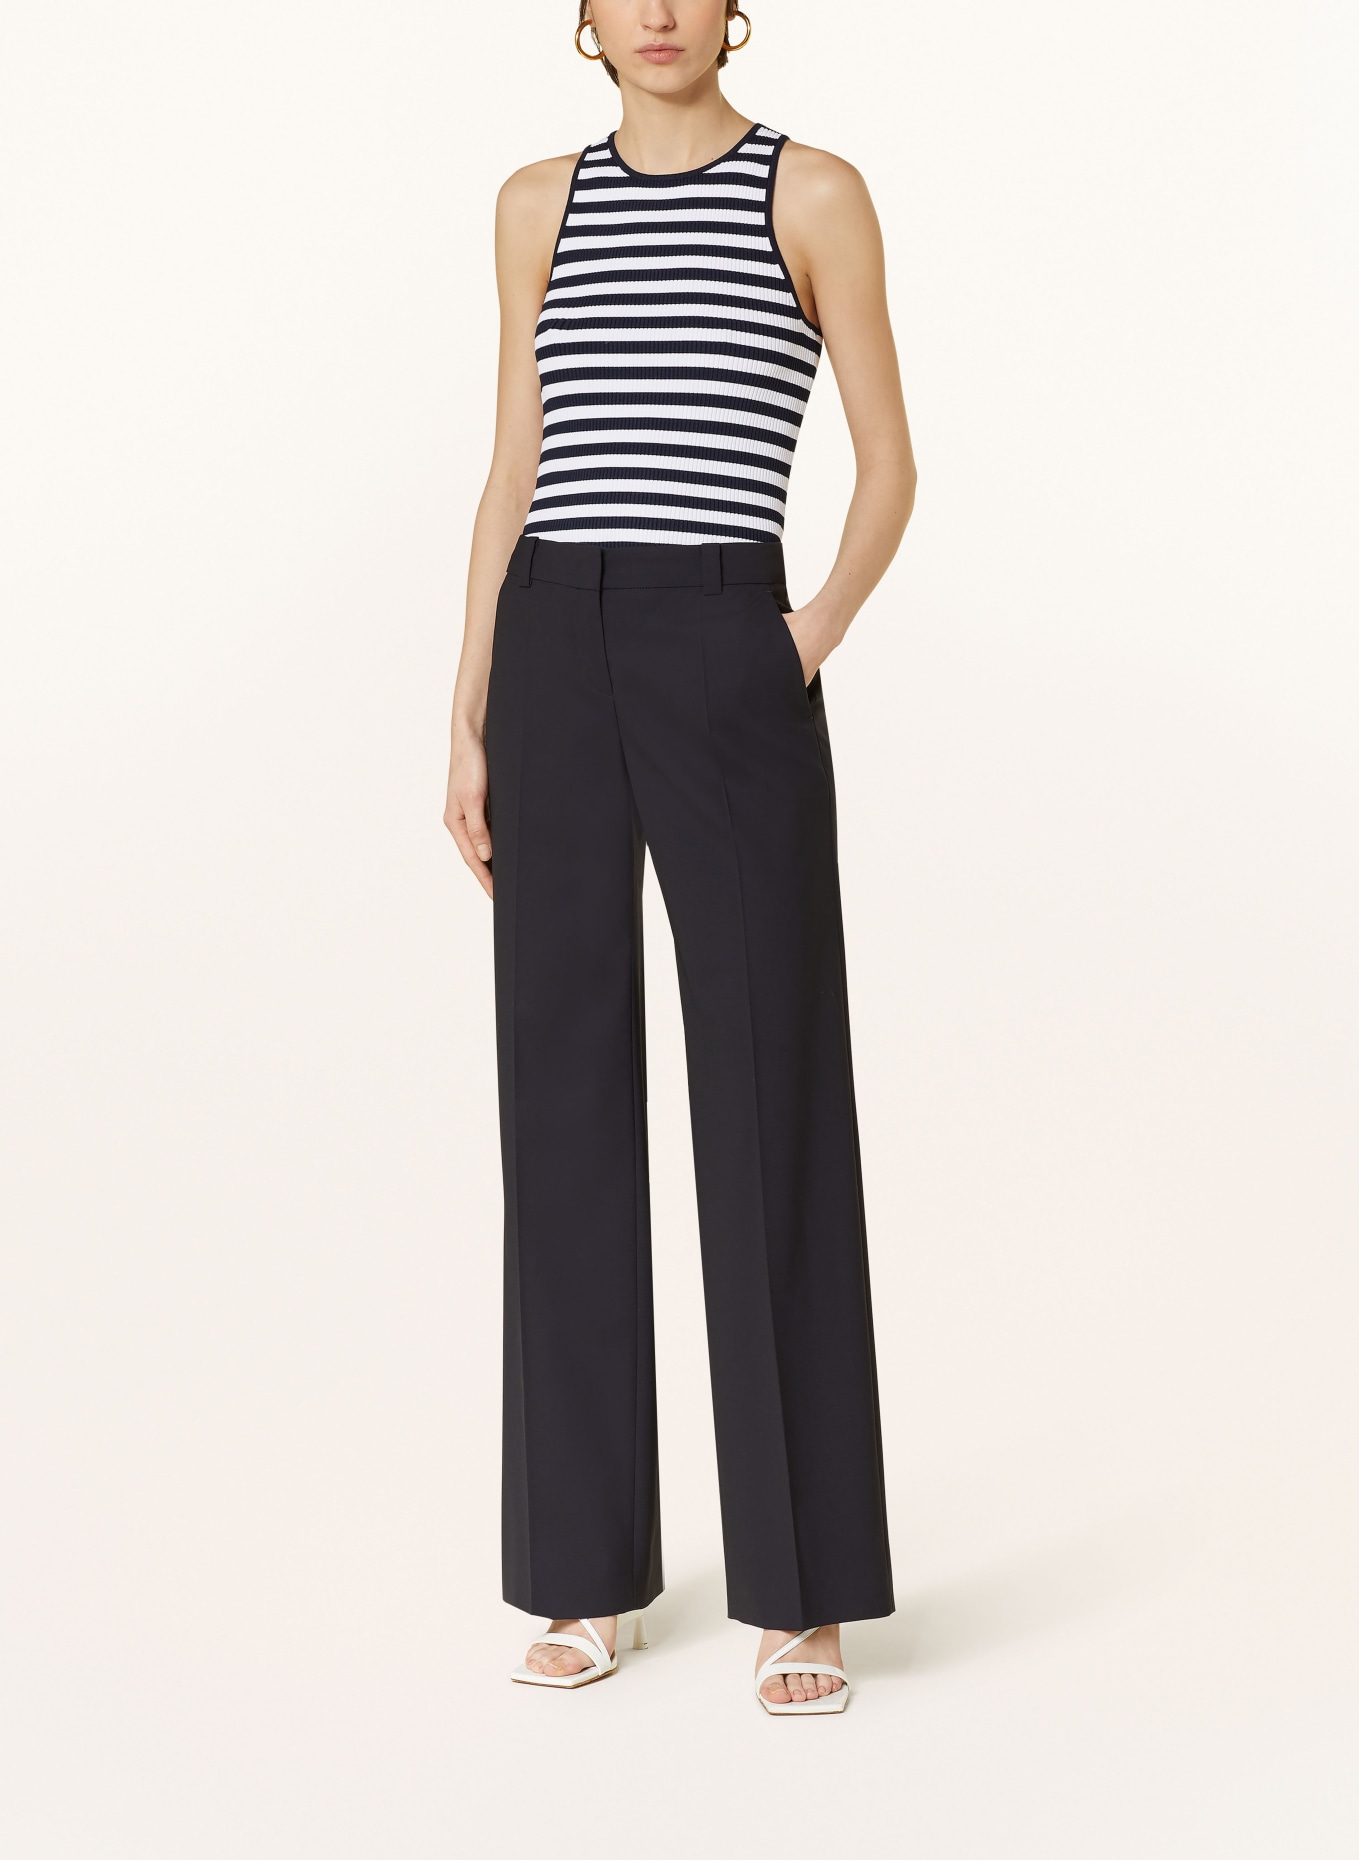 MICHAEL KORS Cropped knit top, Color: DARK BLUE/ WHITE (Image 2)